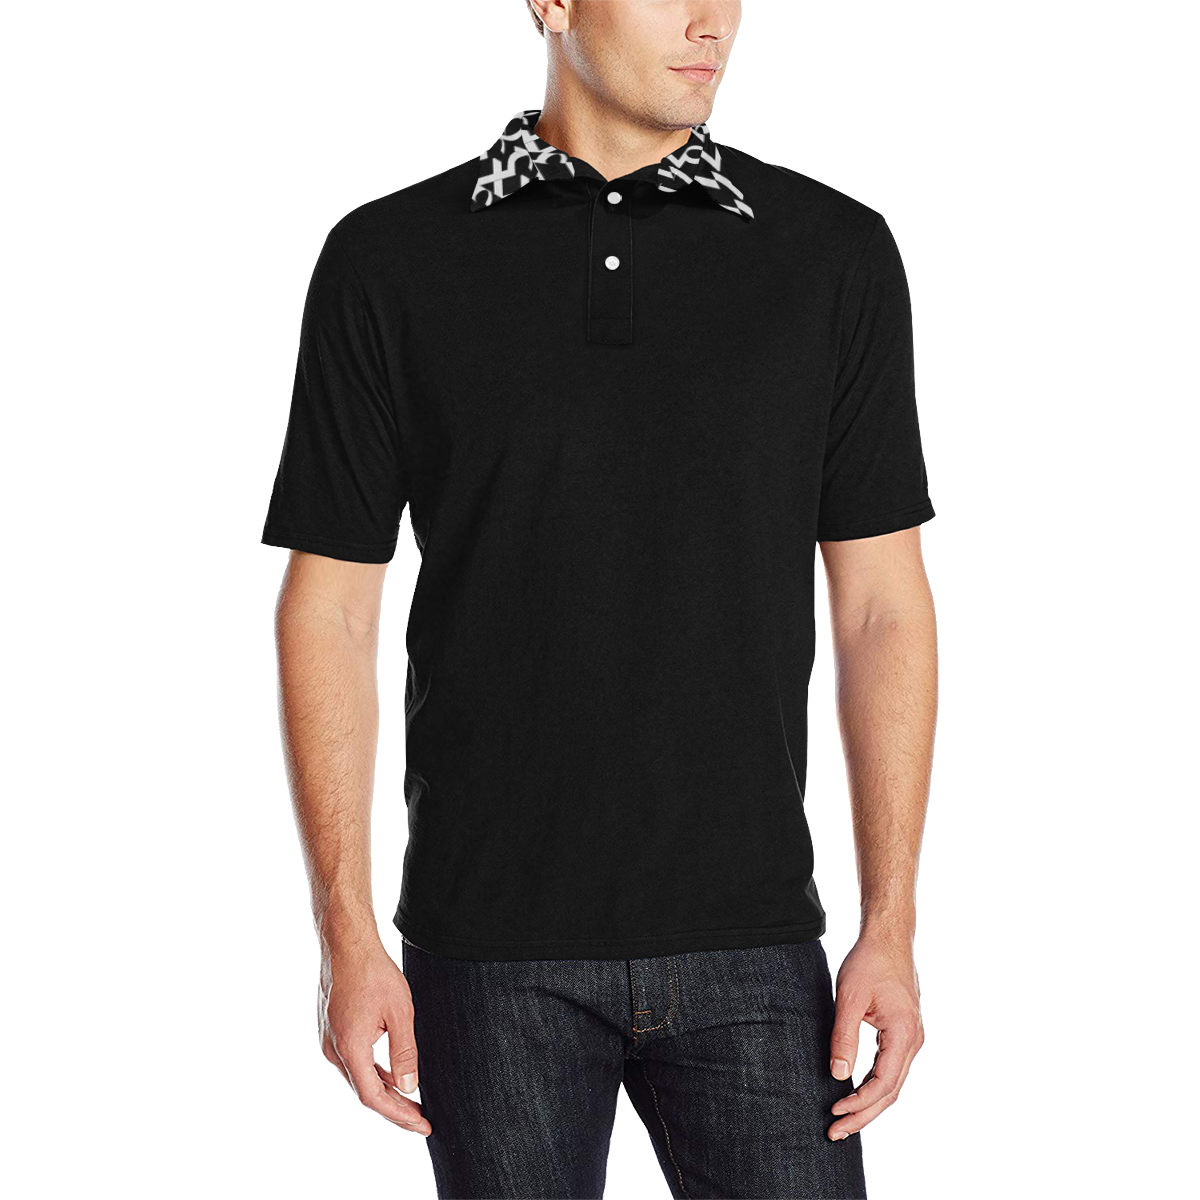 NUMBERS Collection 1234567 Collar Black/White Men's All Over Print Polo Shirt (Model T55)